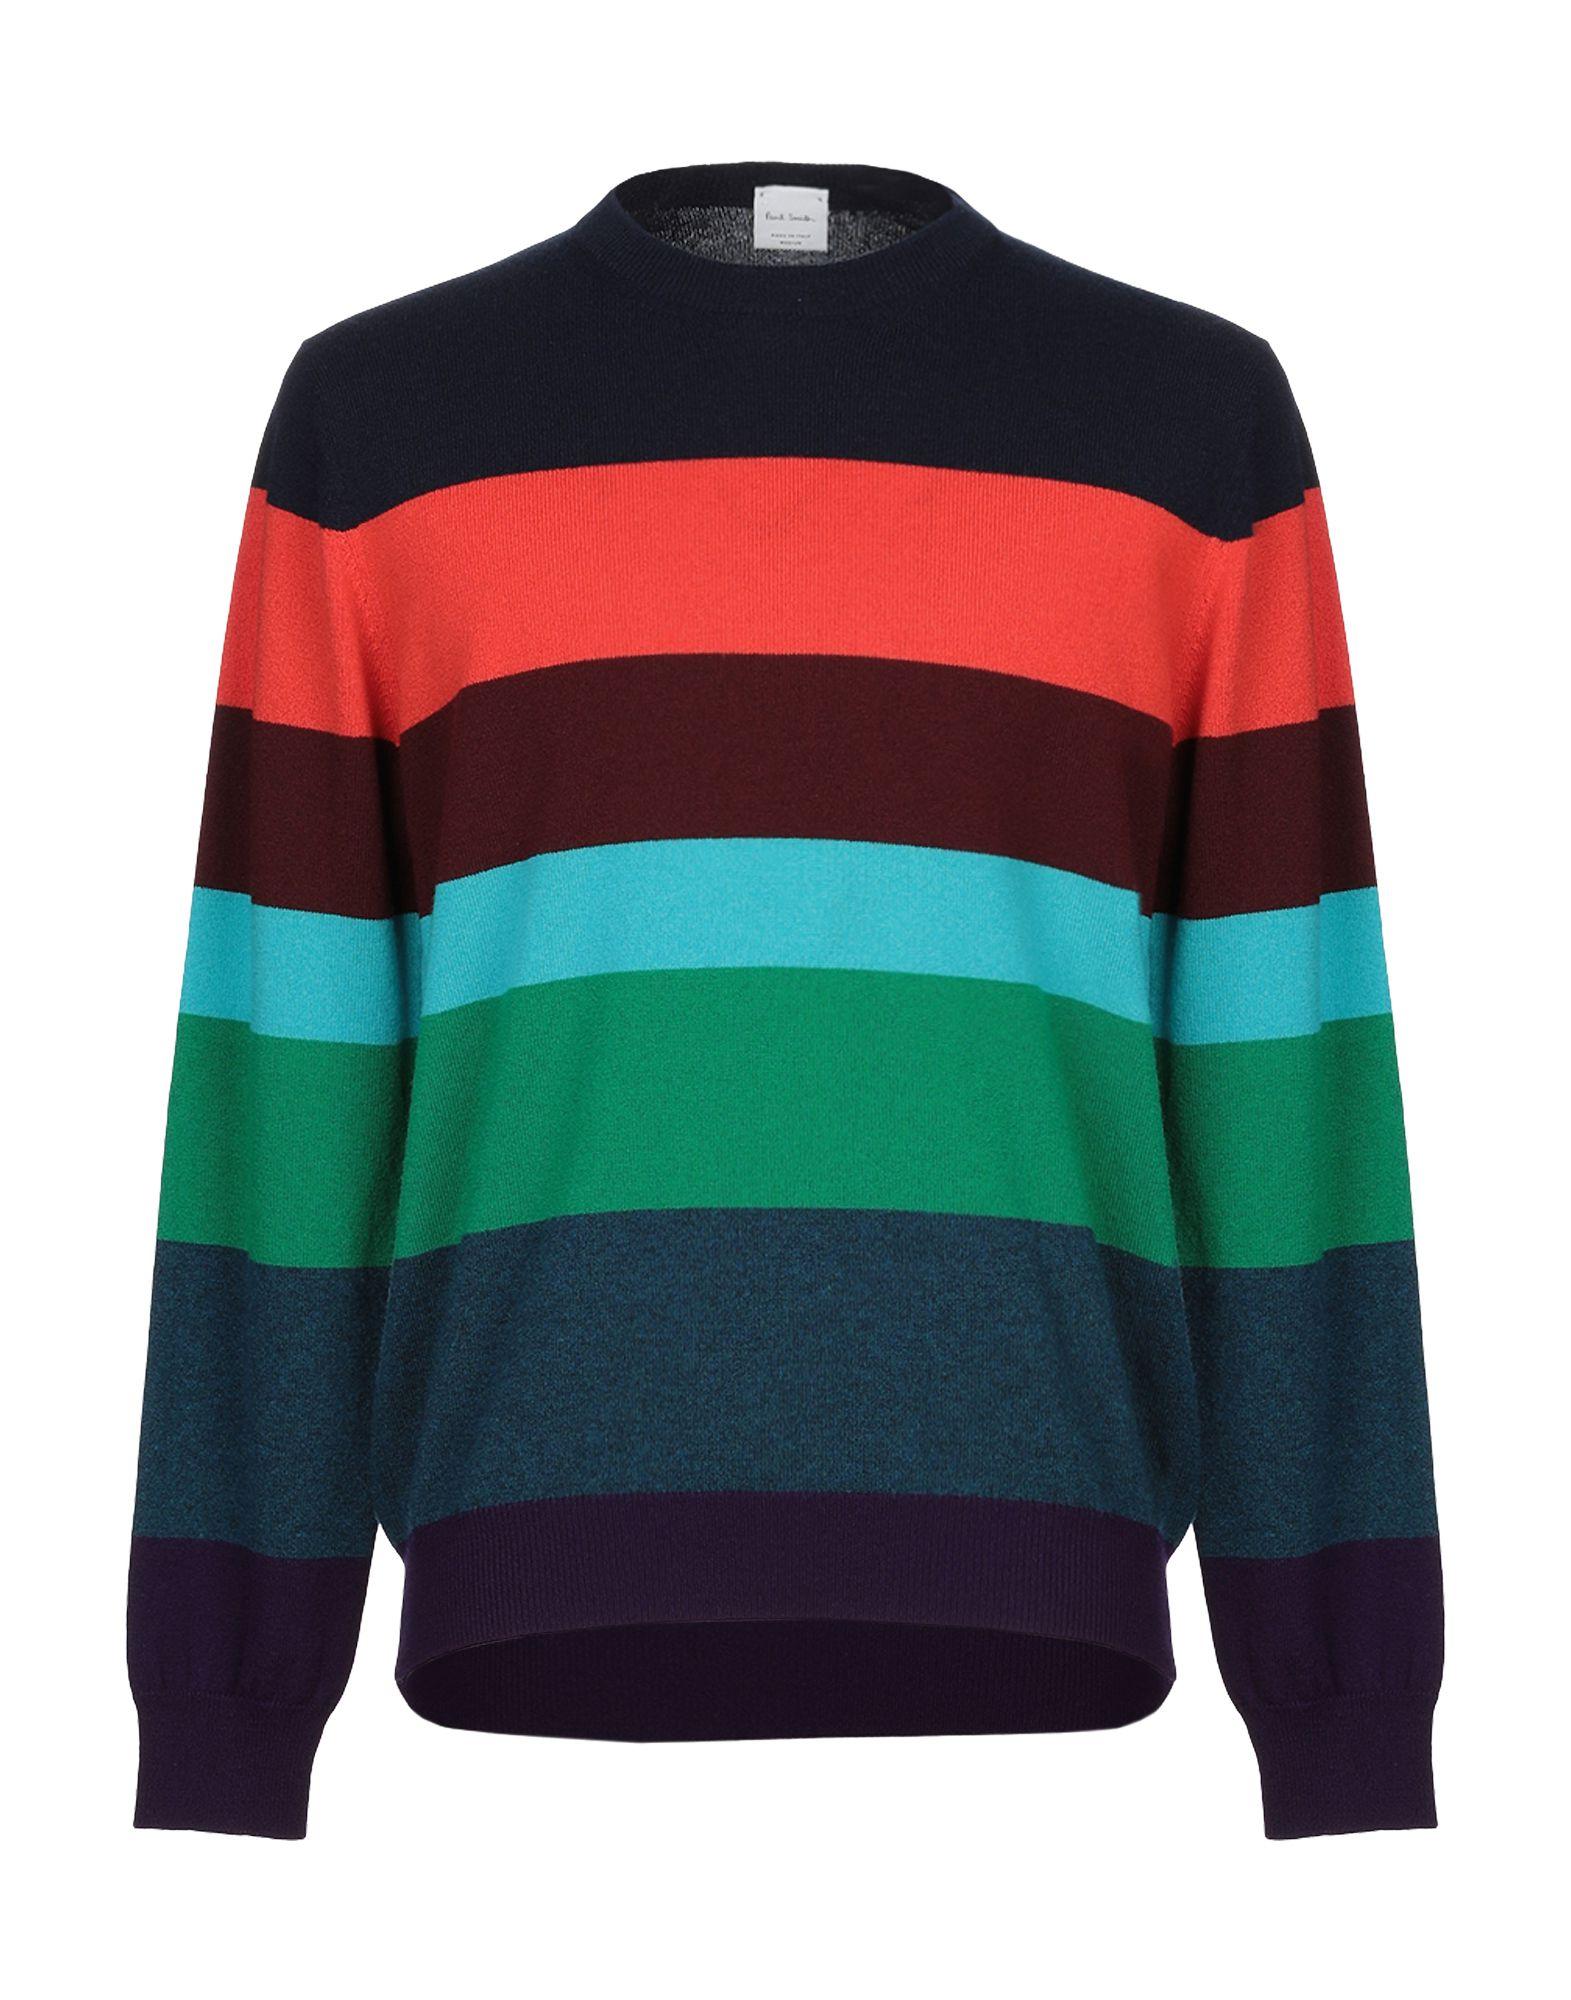 Paul Smith Cashmere Sweater in Dark Blue (Blue) for Men - Lyst